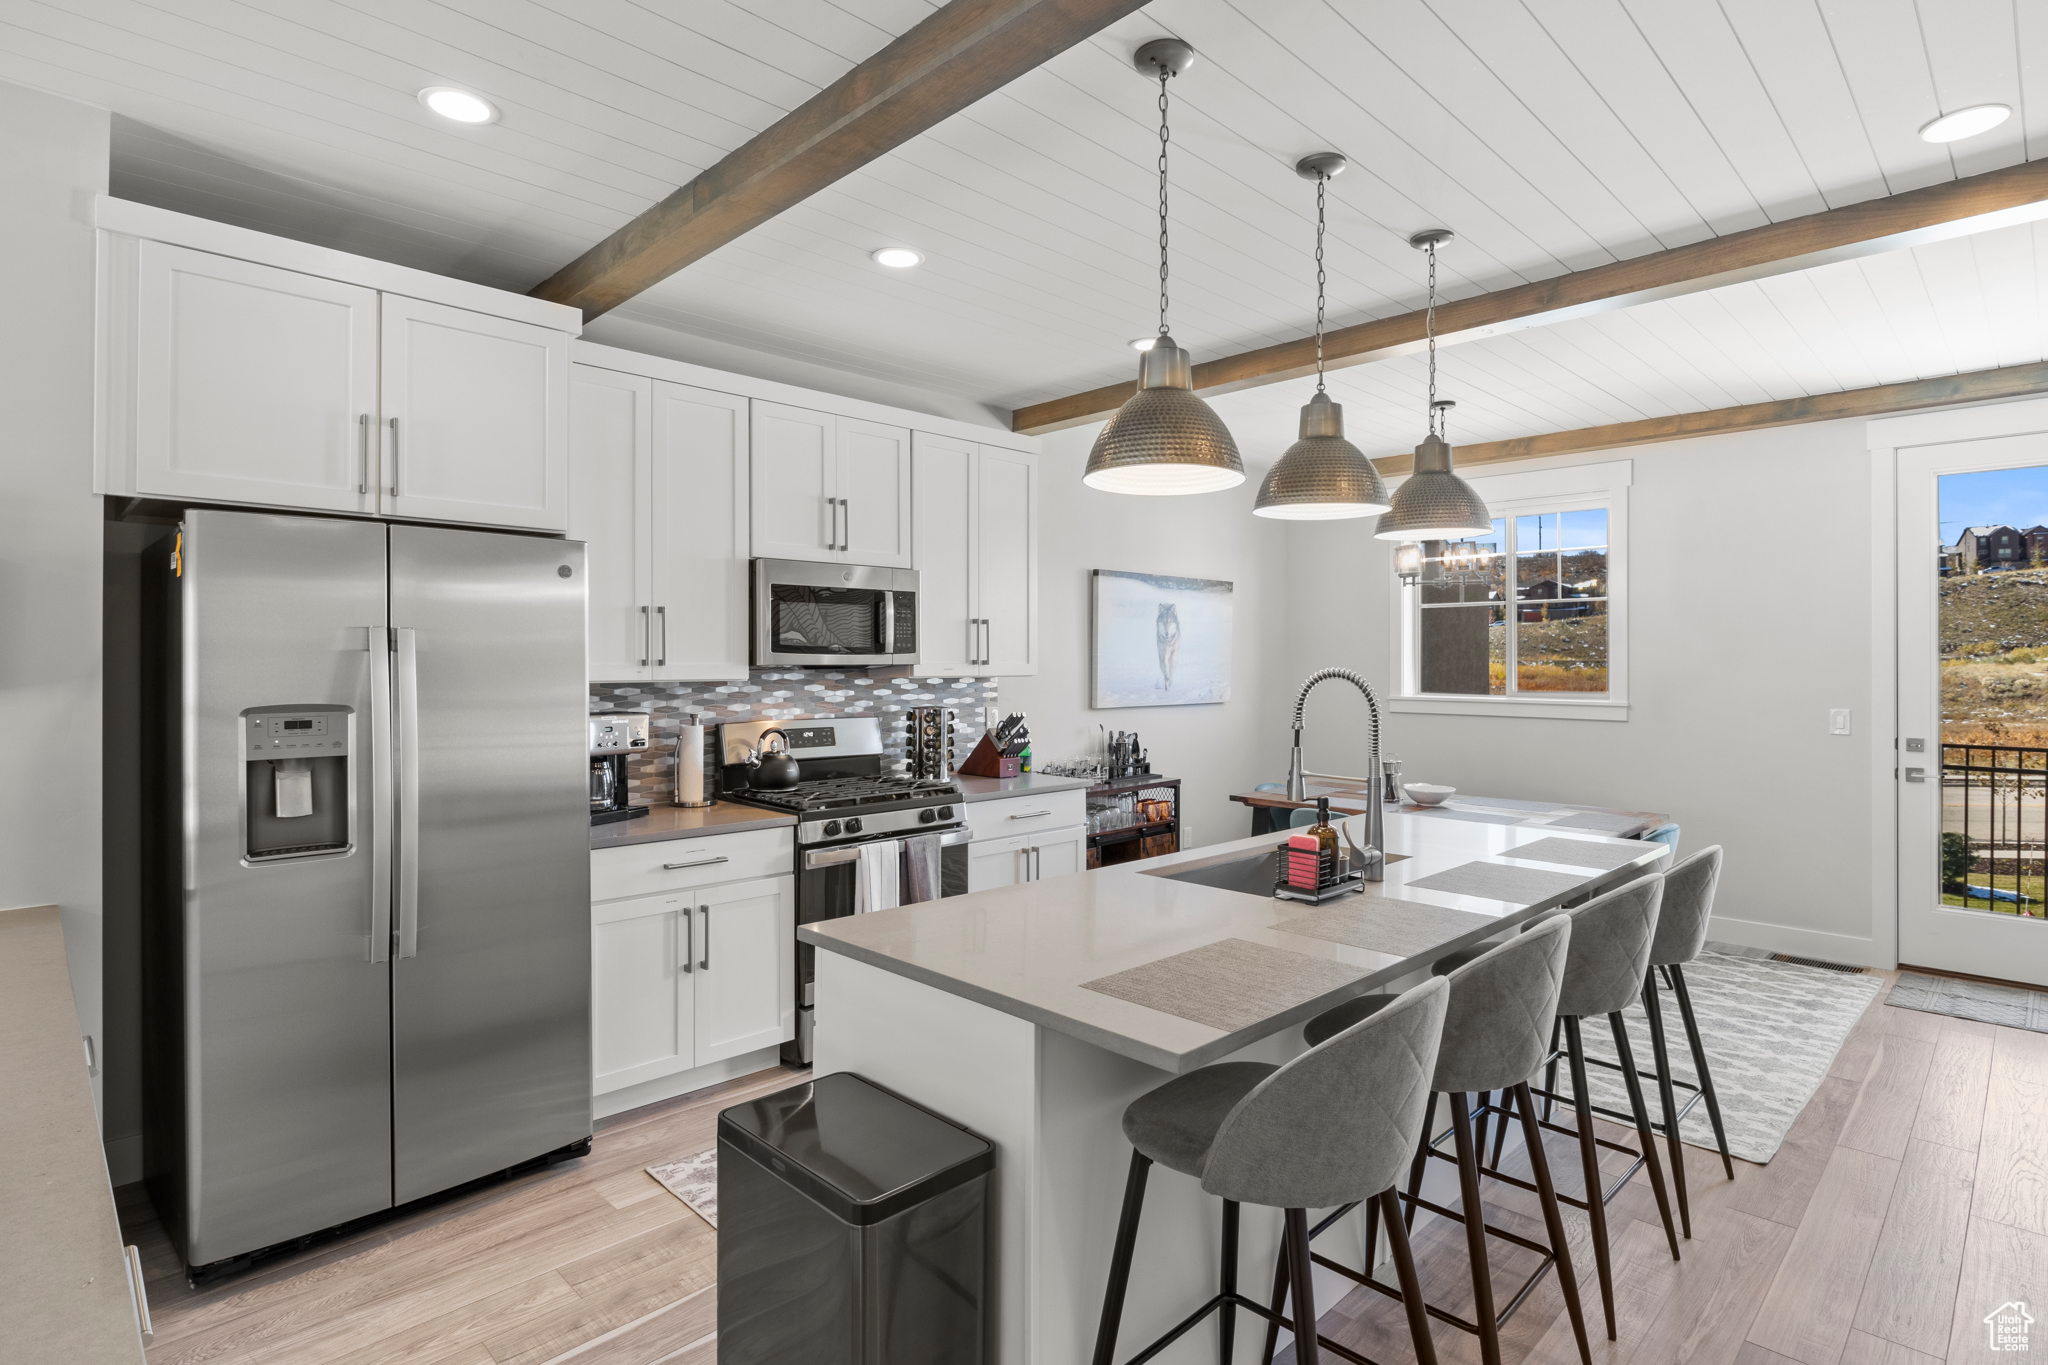 Kitchen with appliances with stainless steel finishes, light wood-type flooring, hanging light fixtures, beam ceiling, and an island with sink